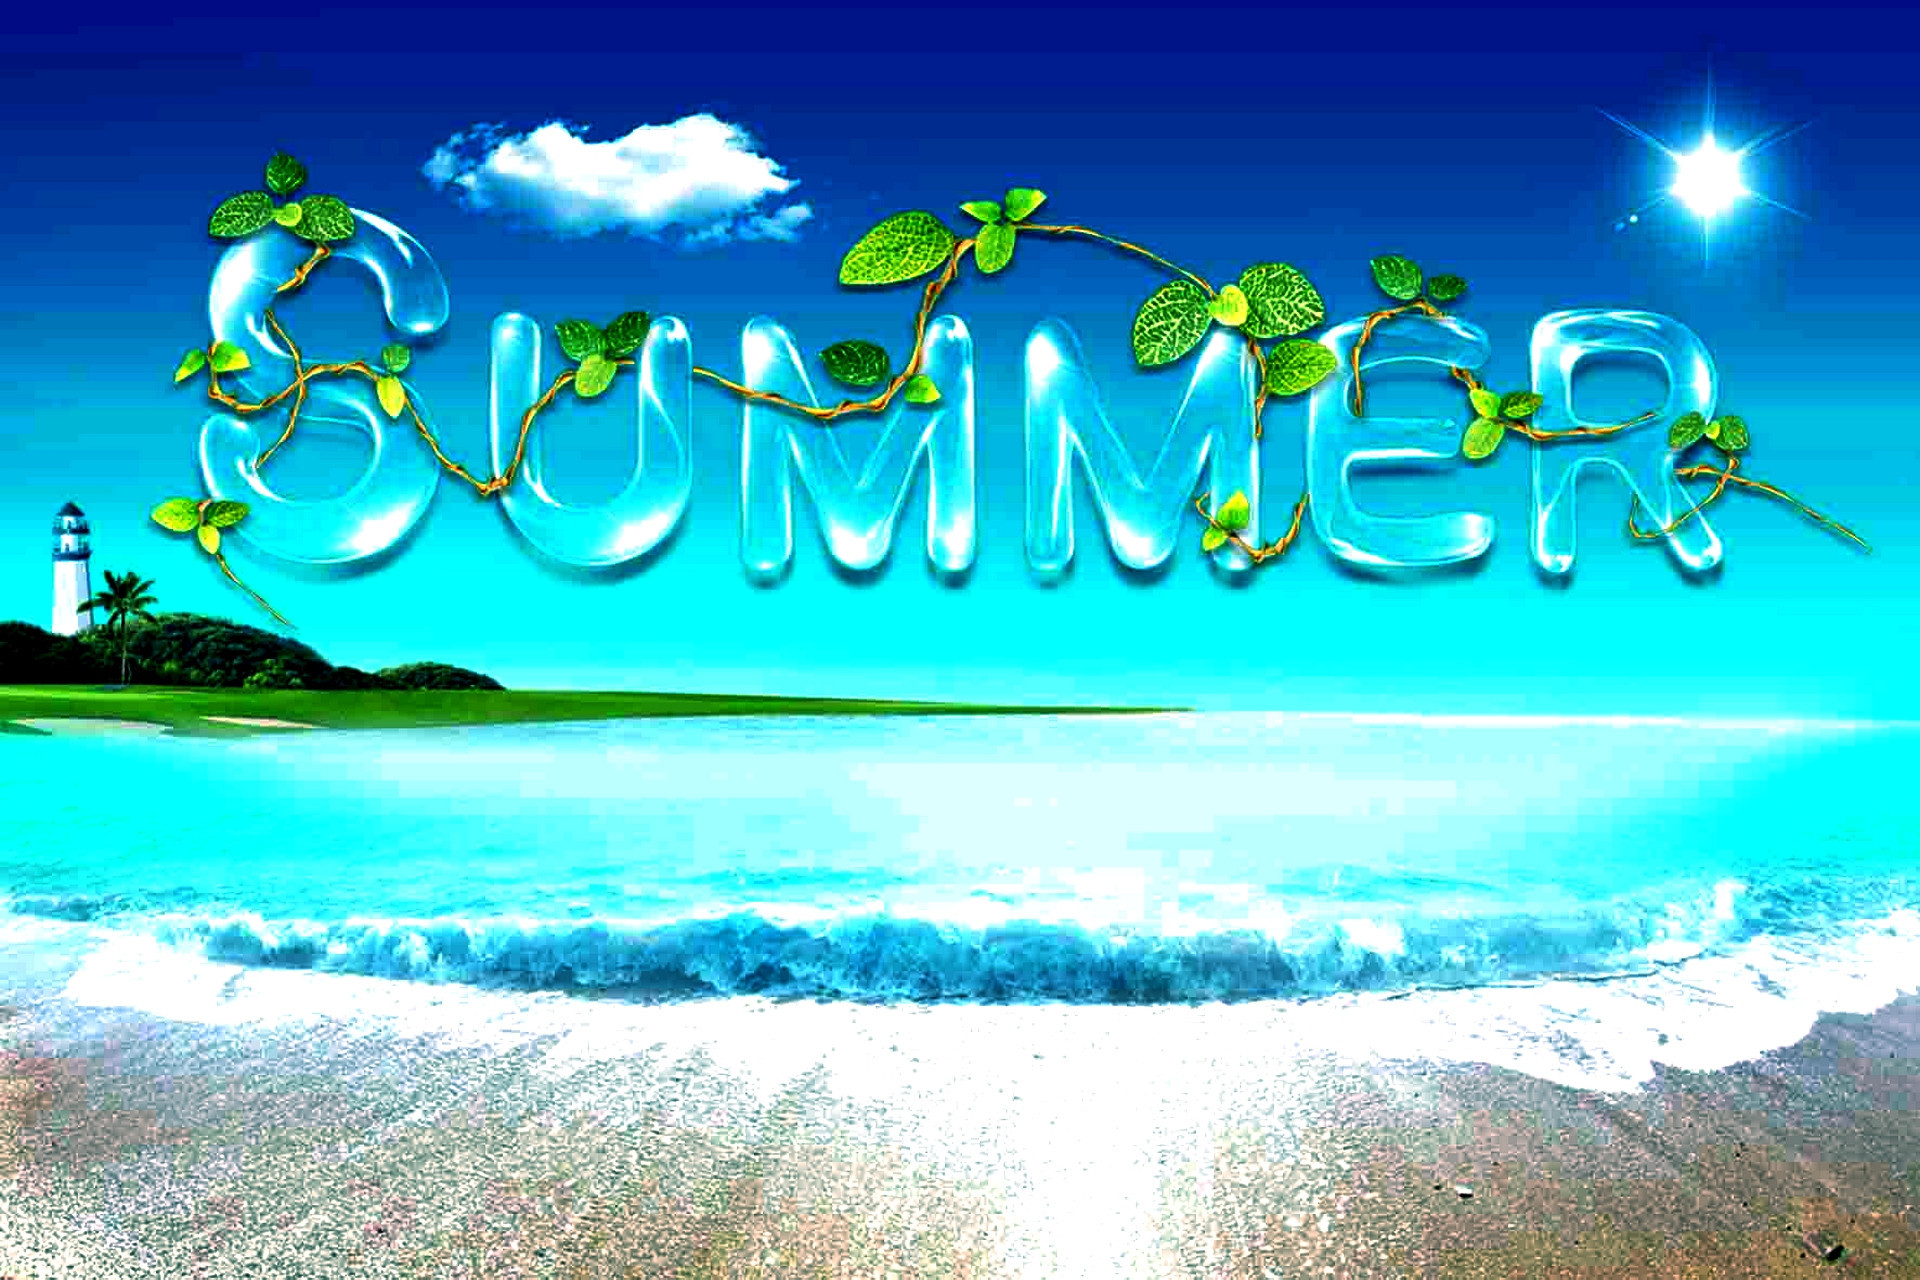 1920x1280 summer wallpaper hd full and free